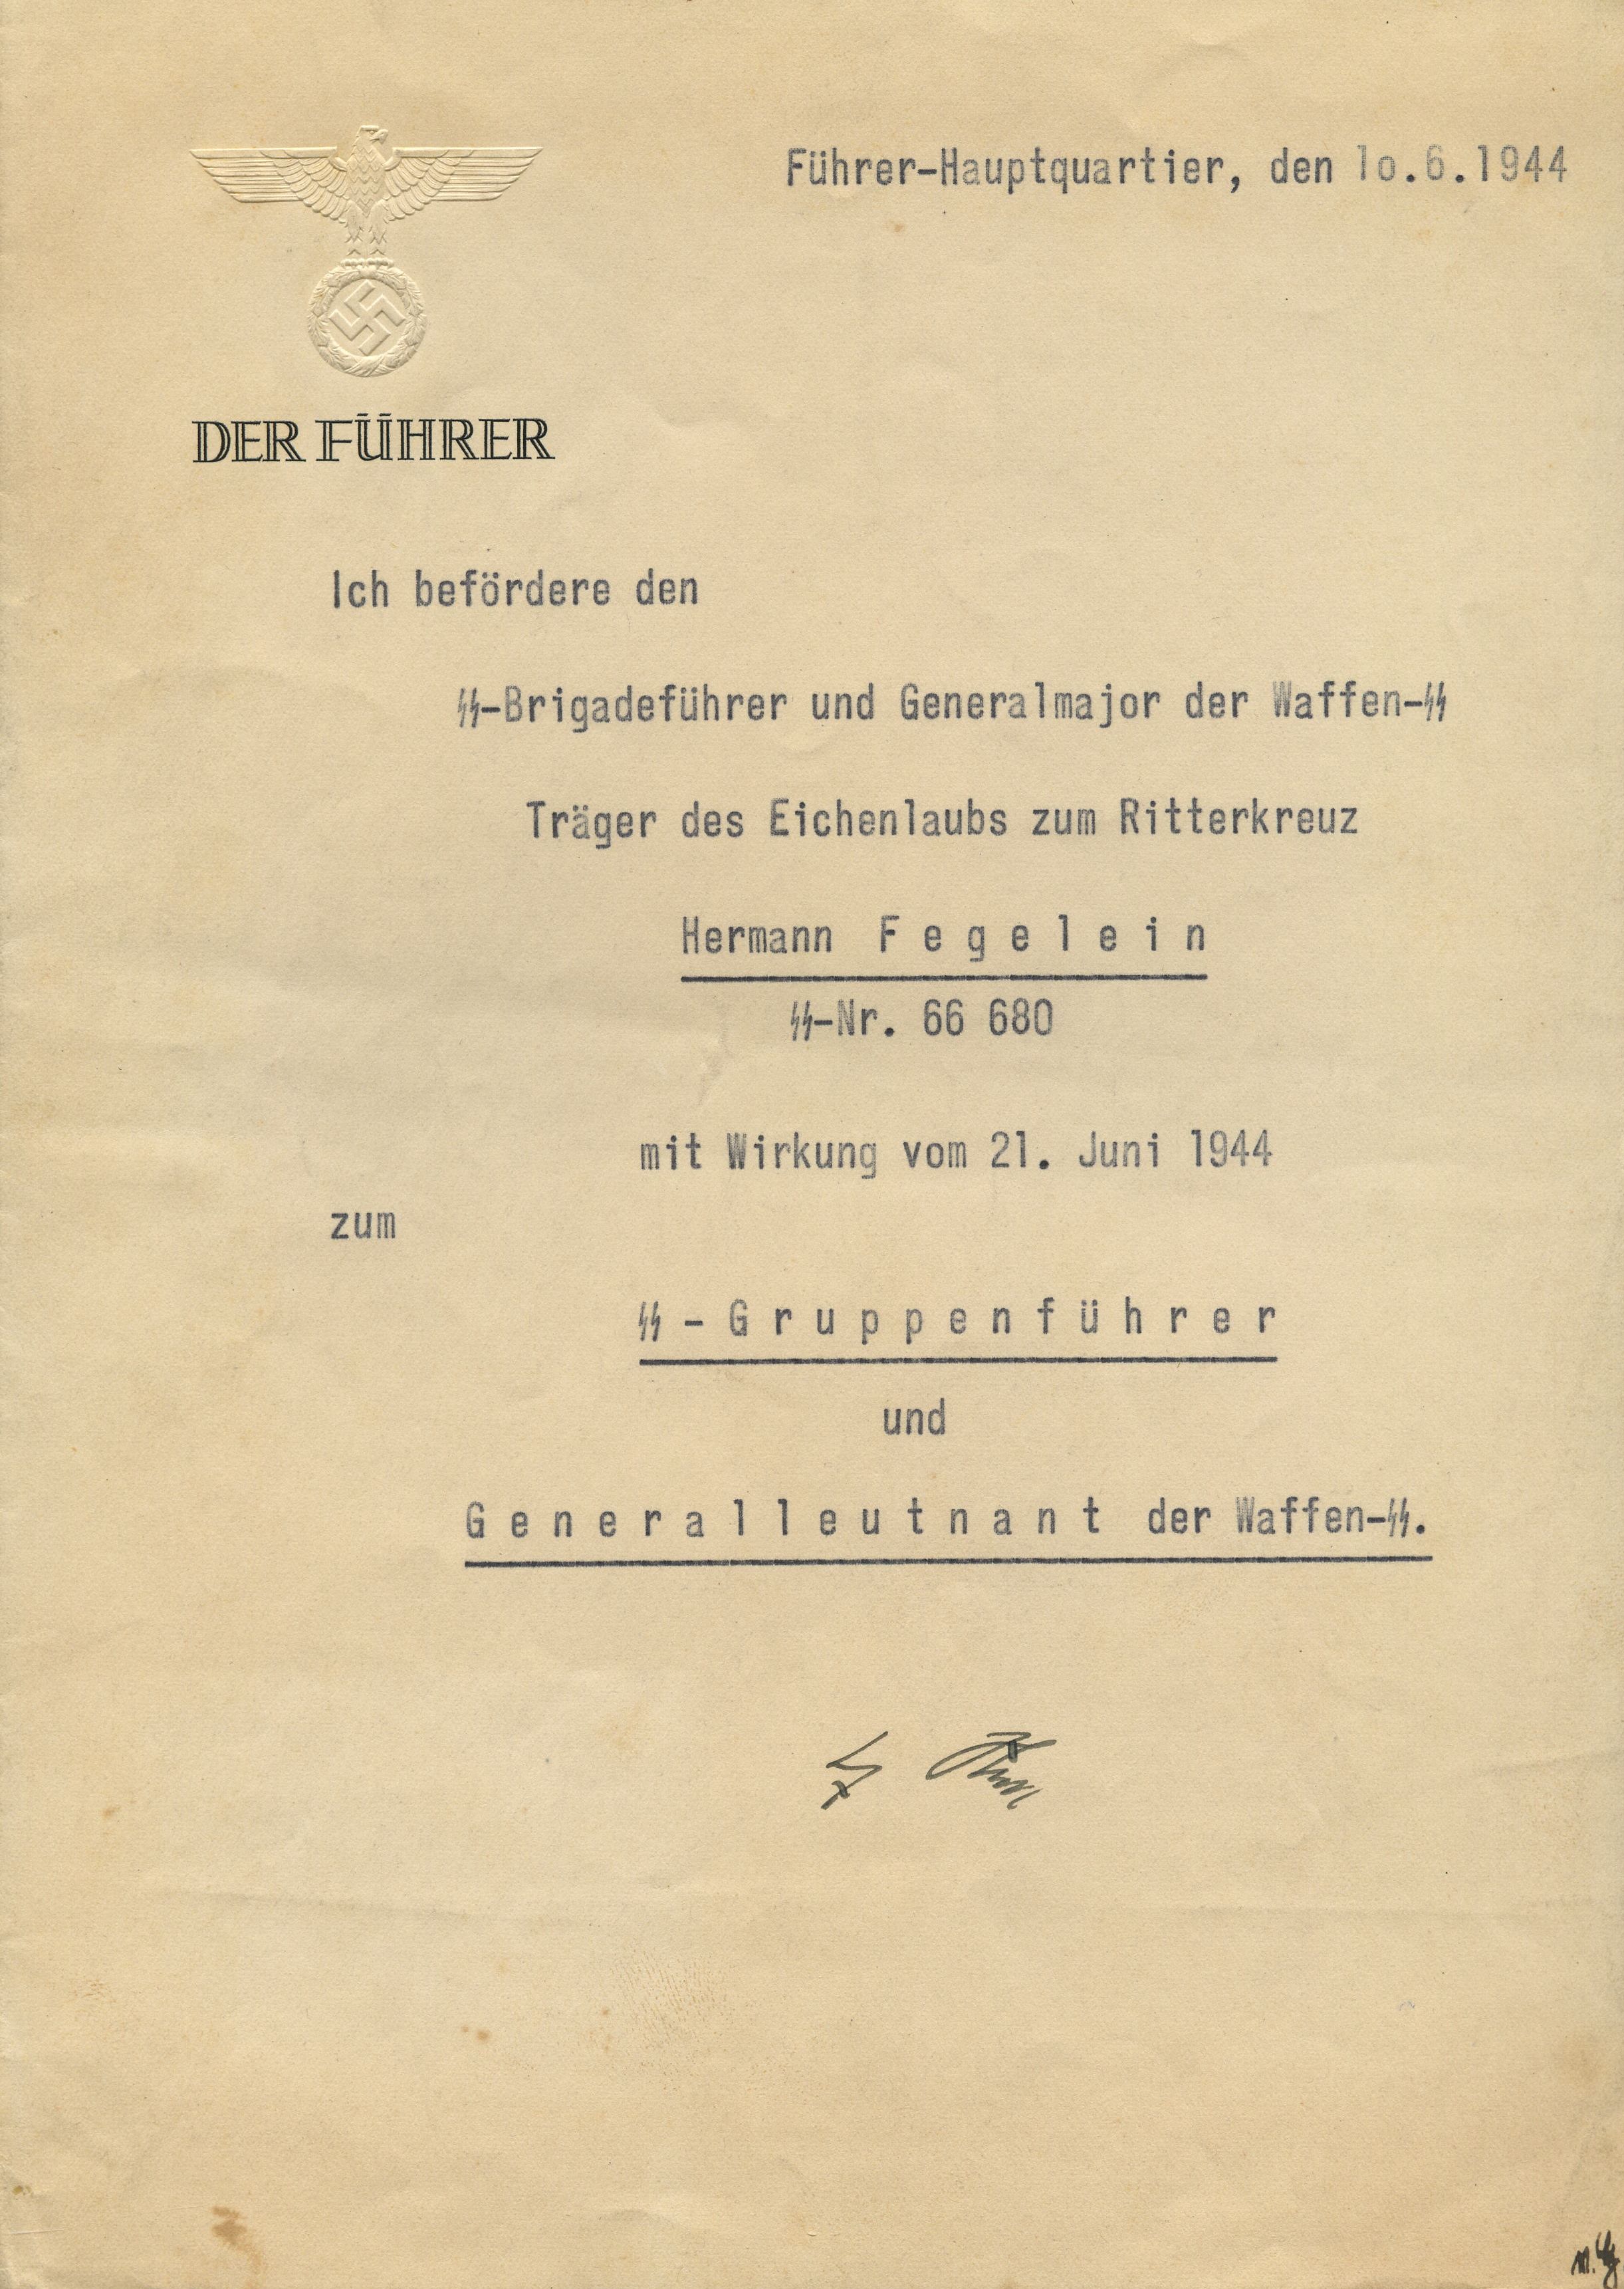 Hitler's papers with signature and stamp